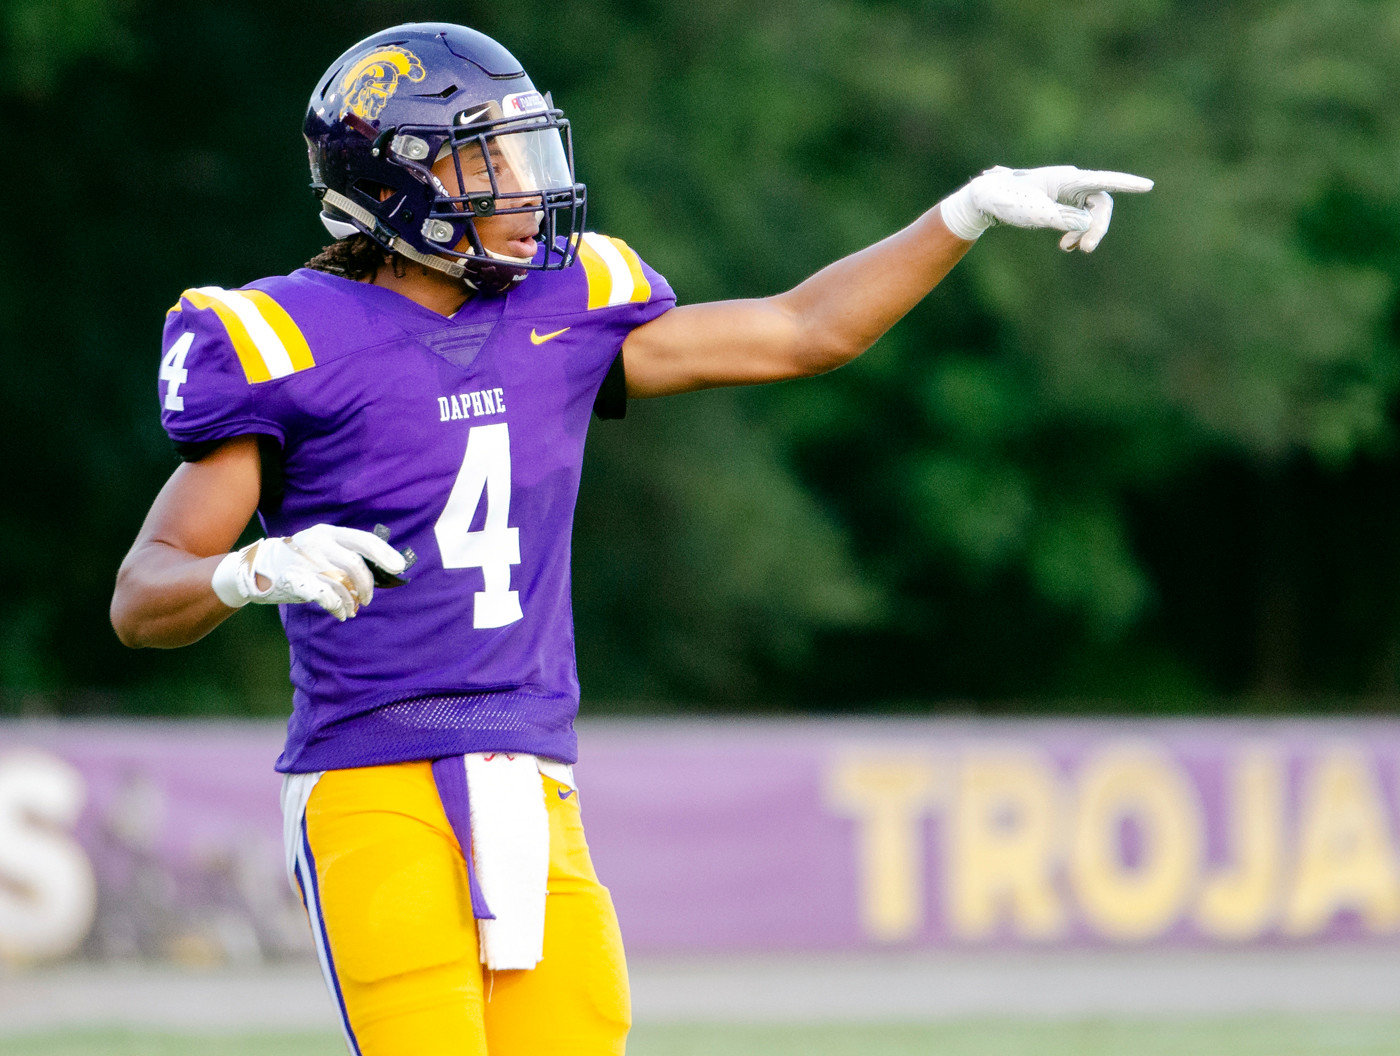 Daphne defensive back Christian Williams gestures to sideline during the Trojans’ 40-6 win over B.C. Rain at home Sept. 14, 2018. Williams is among a slew of former Baldwin County standouts holding college roster spots ahead of the season’s kickoff this weekend.